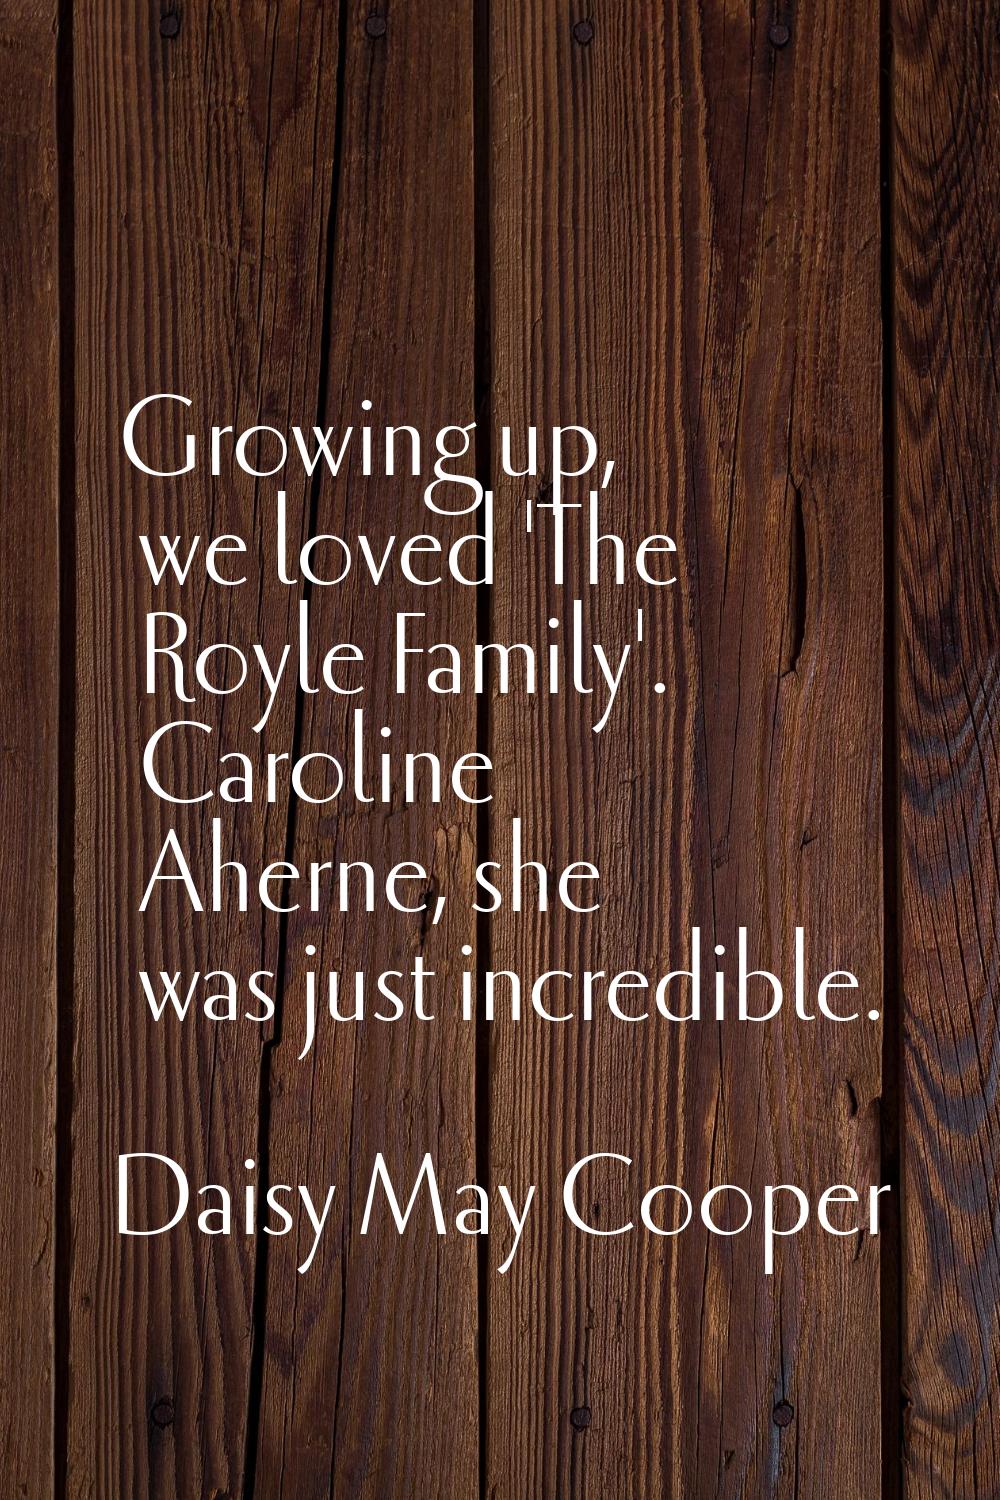 Growing up, we loved 'The Royle Family'. Caroline Aherne, she was just incredible.